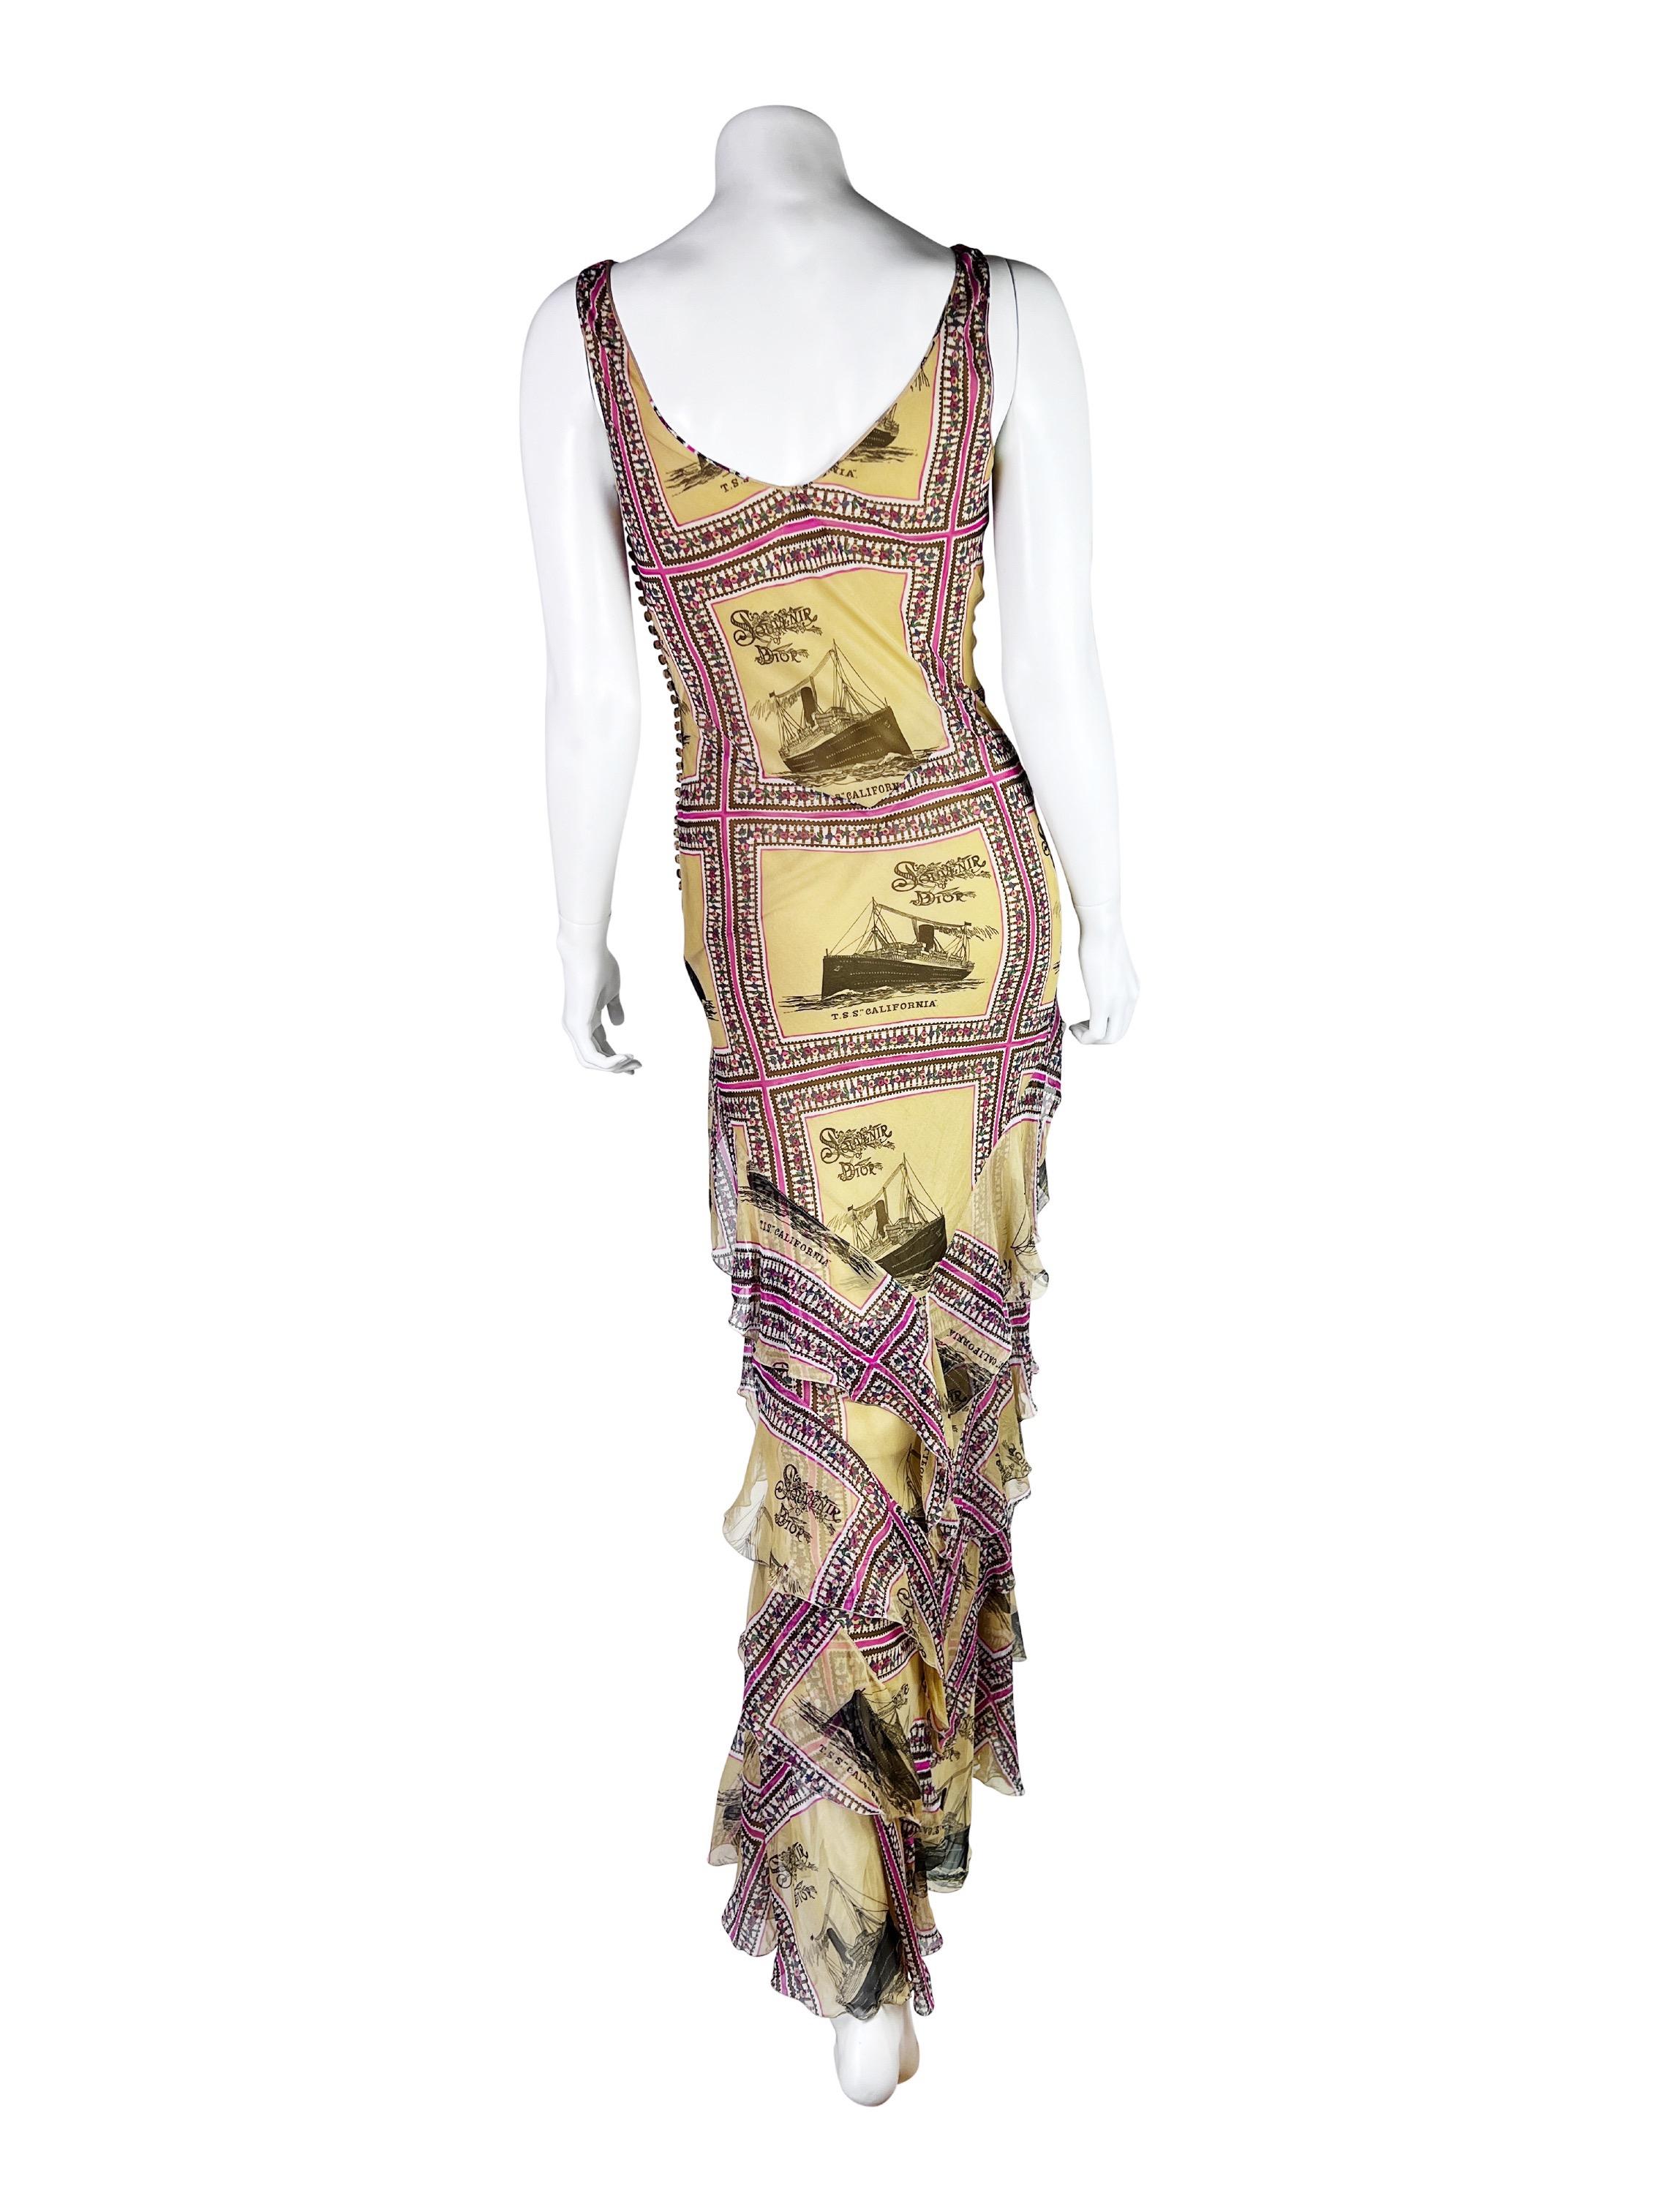 Women's Dior by John Galliano Spring 2002 RTW Printed Silk Gown